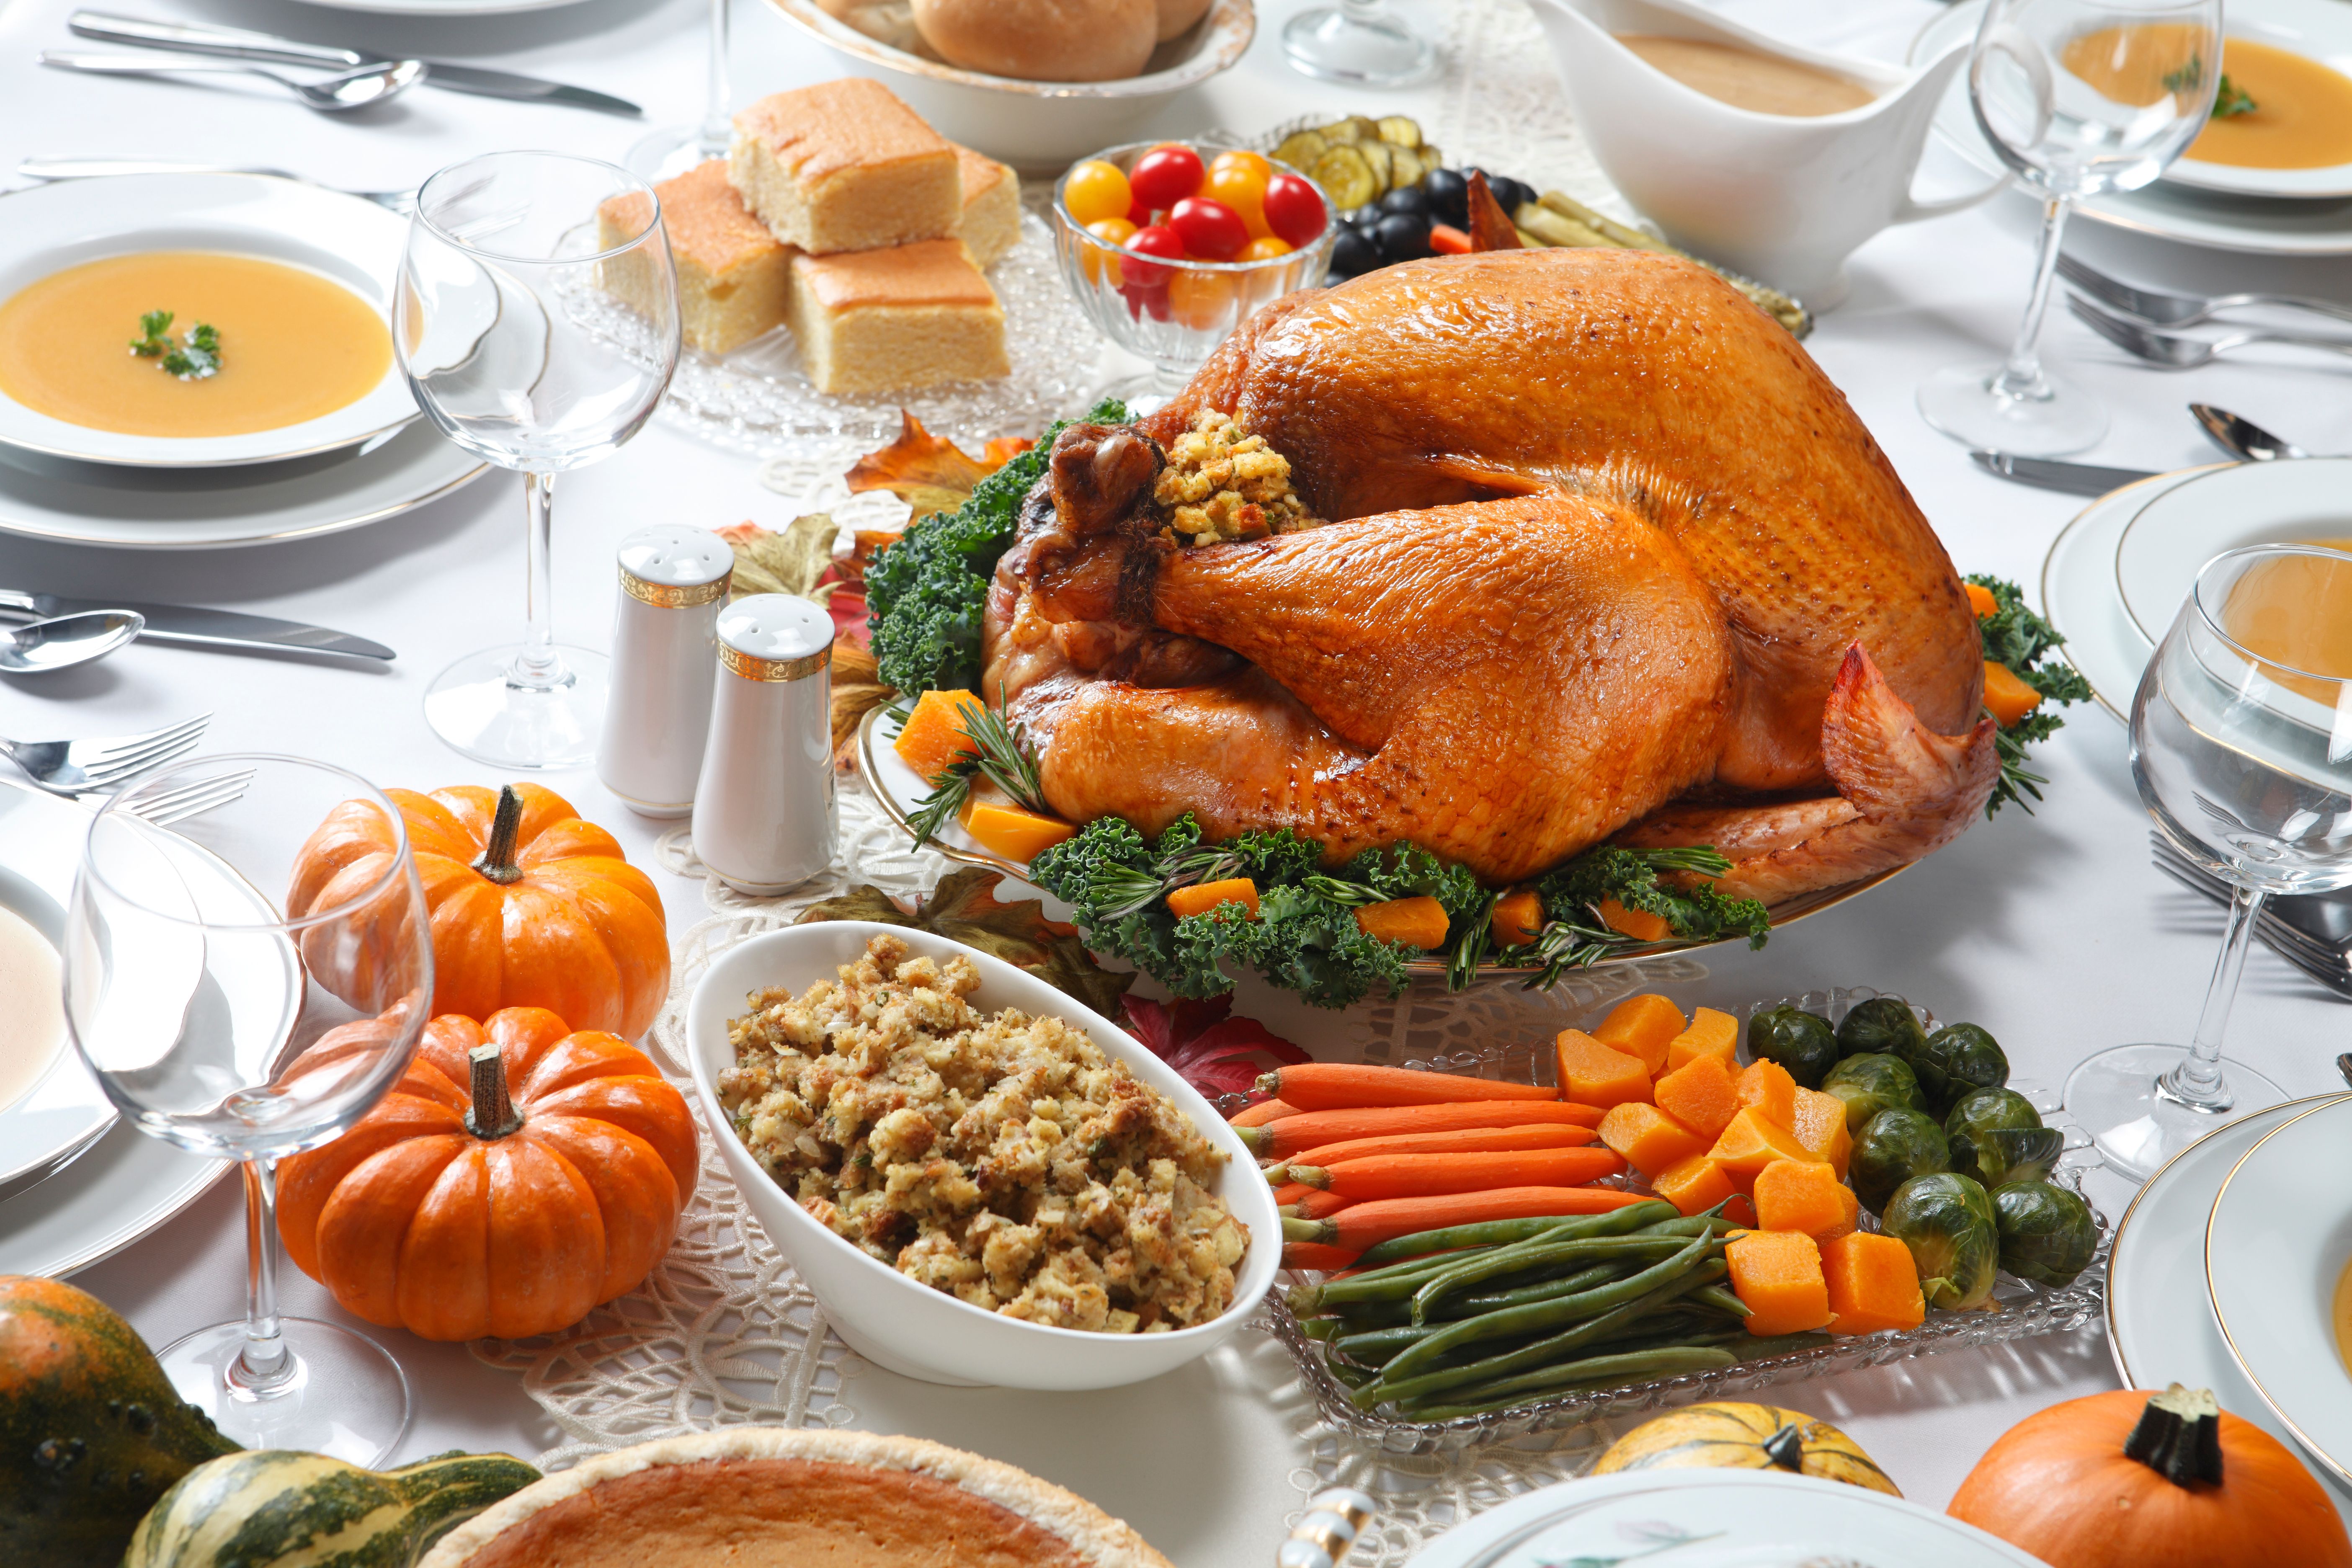 A turkey dinner spread. | Source: Getty Images